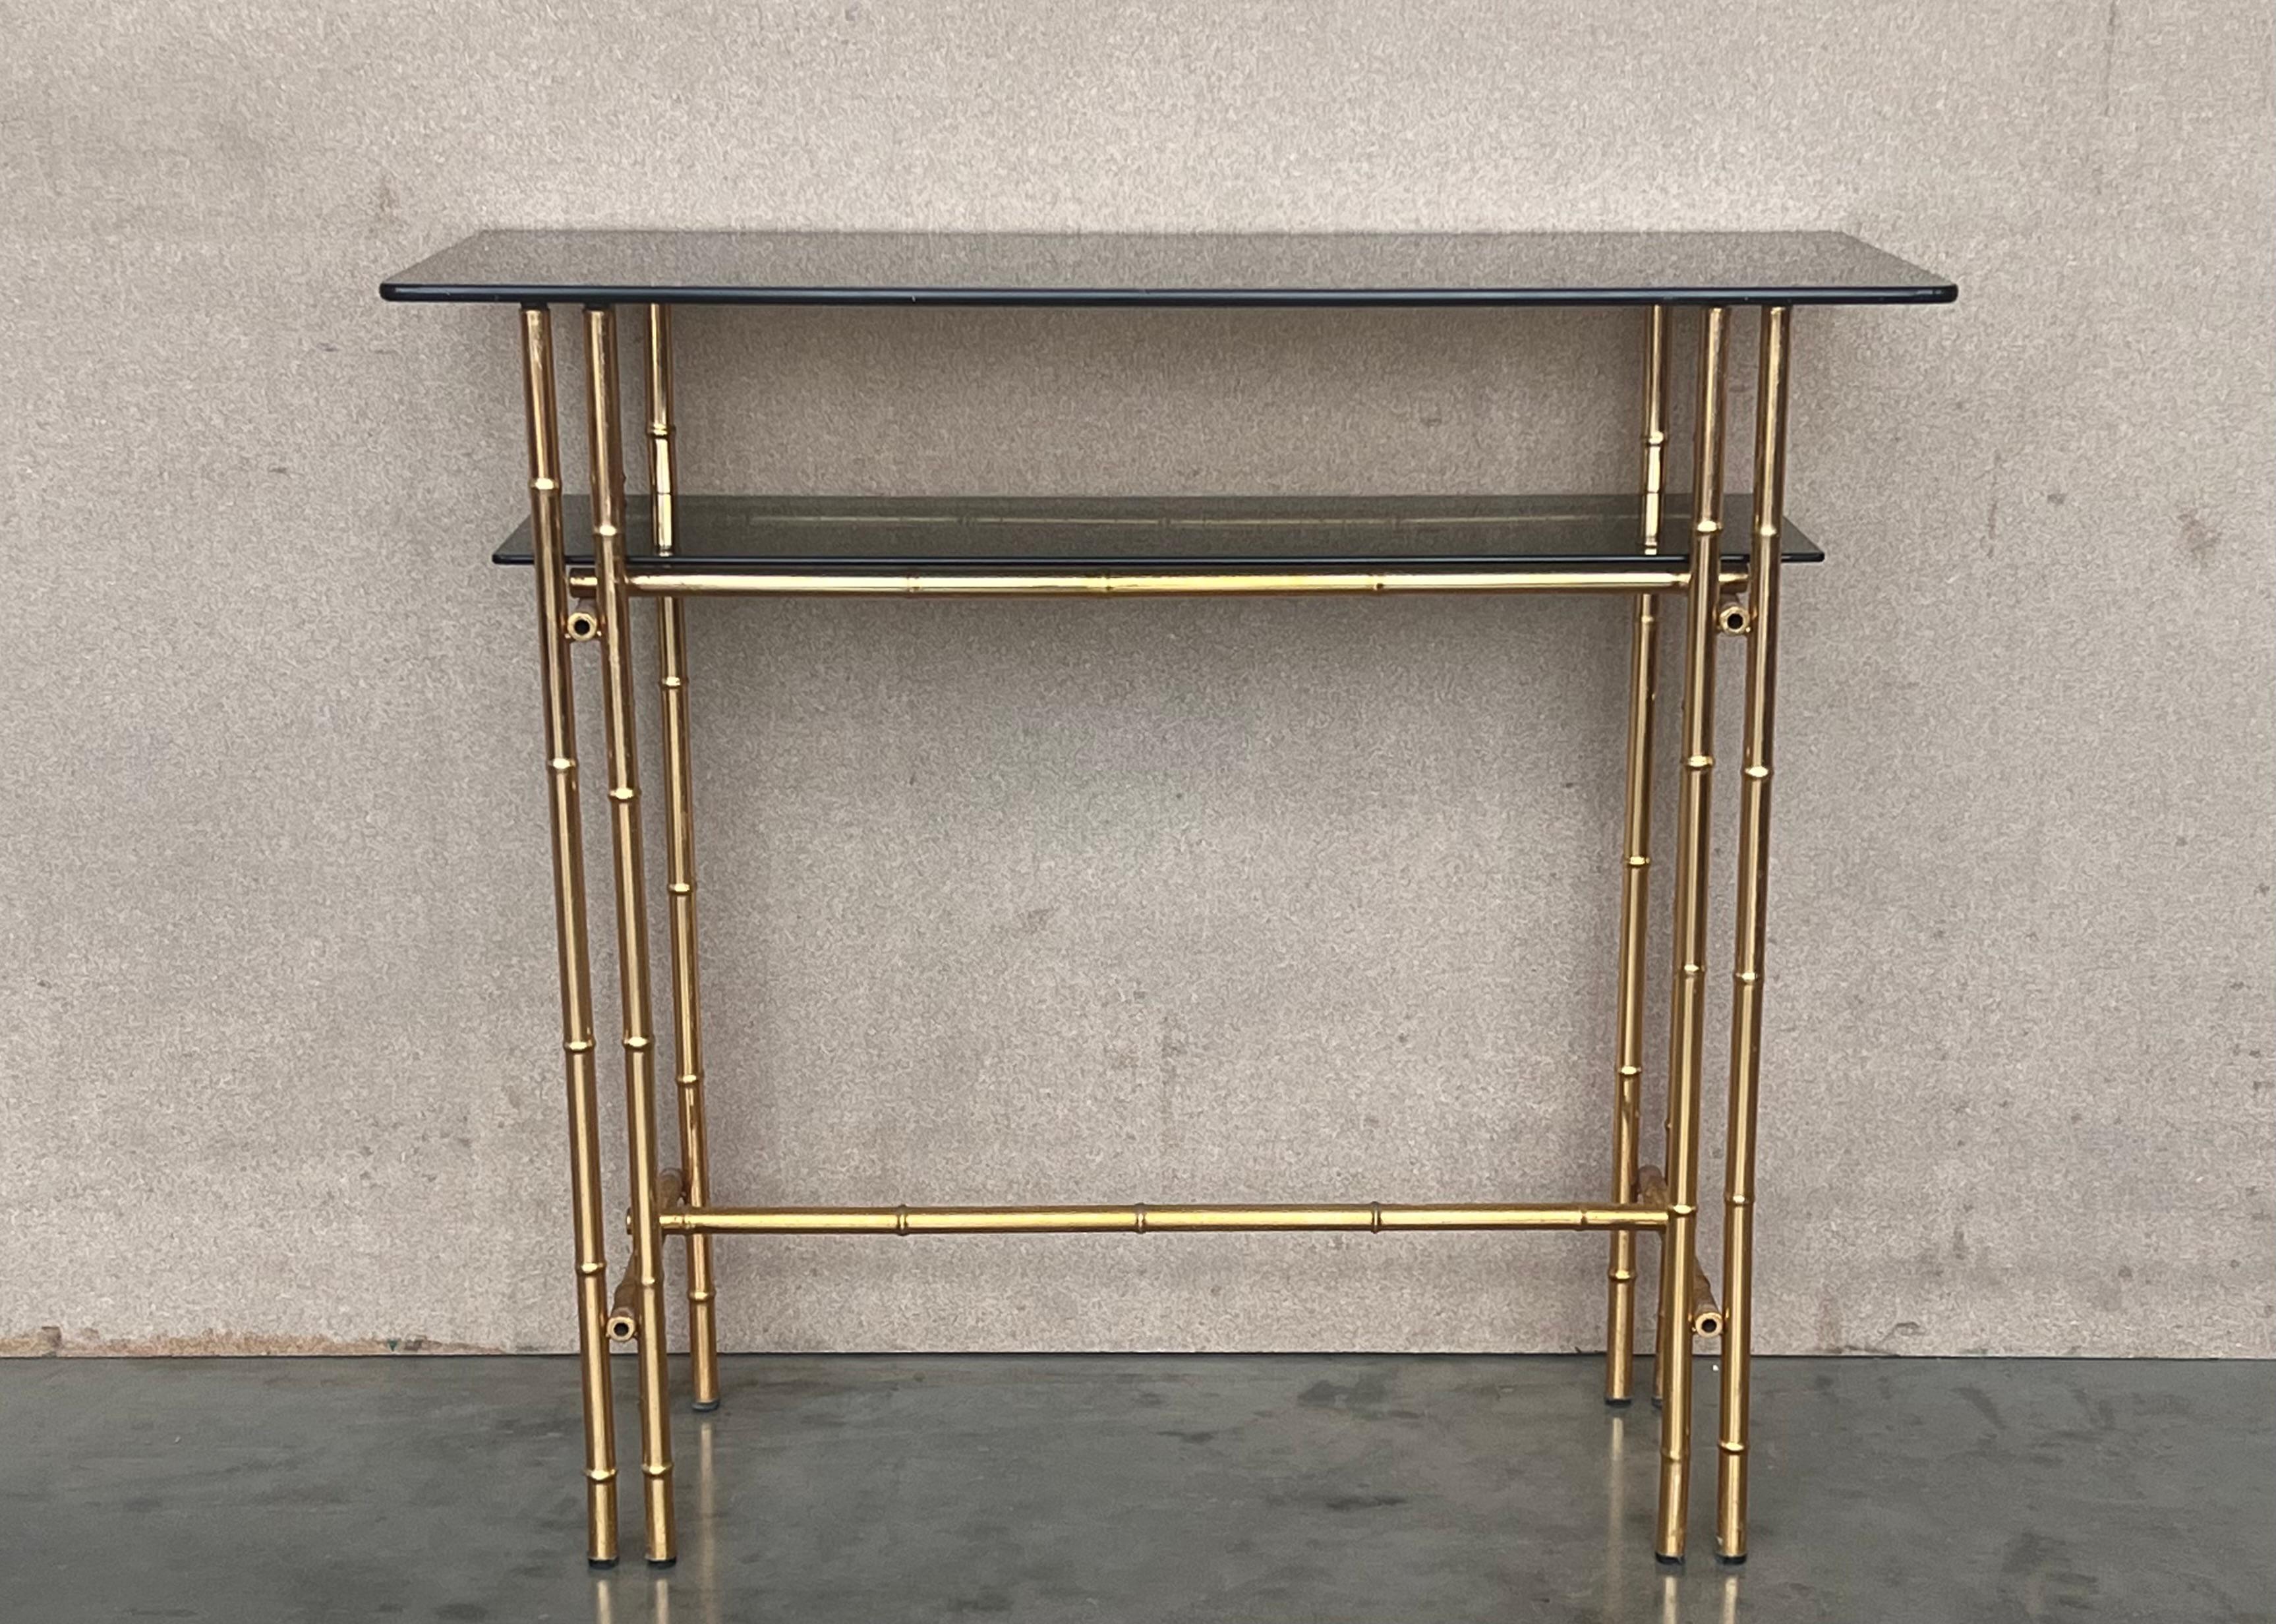 Mid-Century Modern Italian faux bamboo gilt metal console table or vanity with smoked glass.

Measures: Total height: 32in
Height to the middle low shelve: 25.78in
